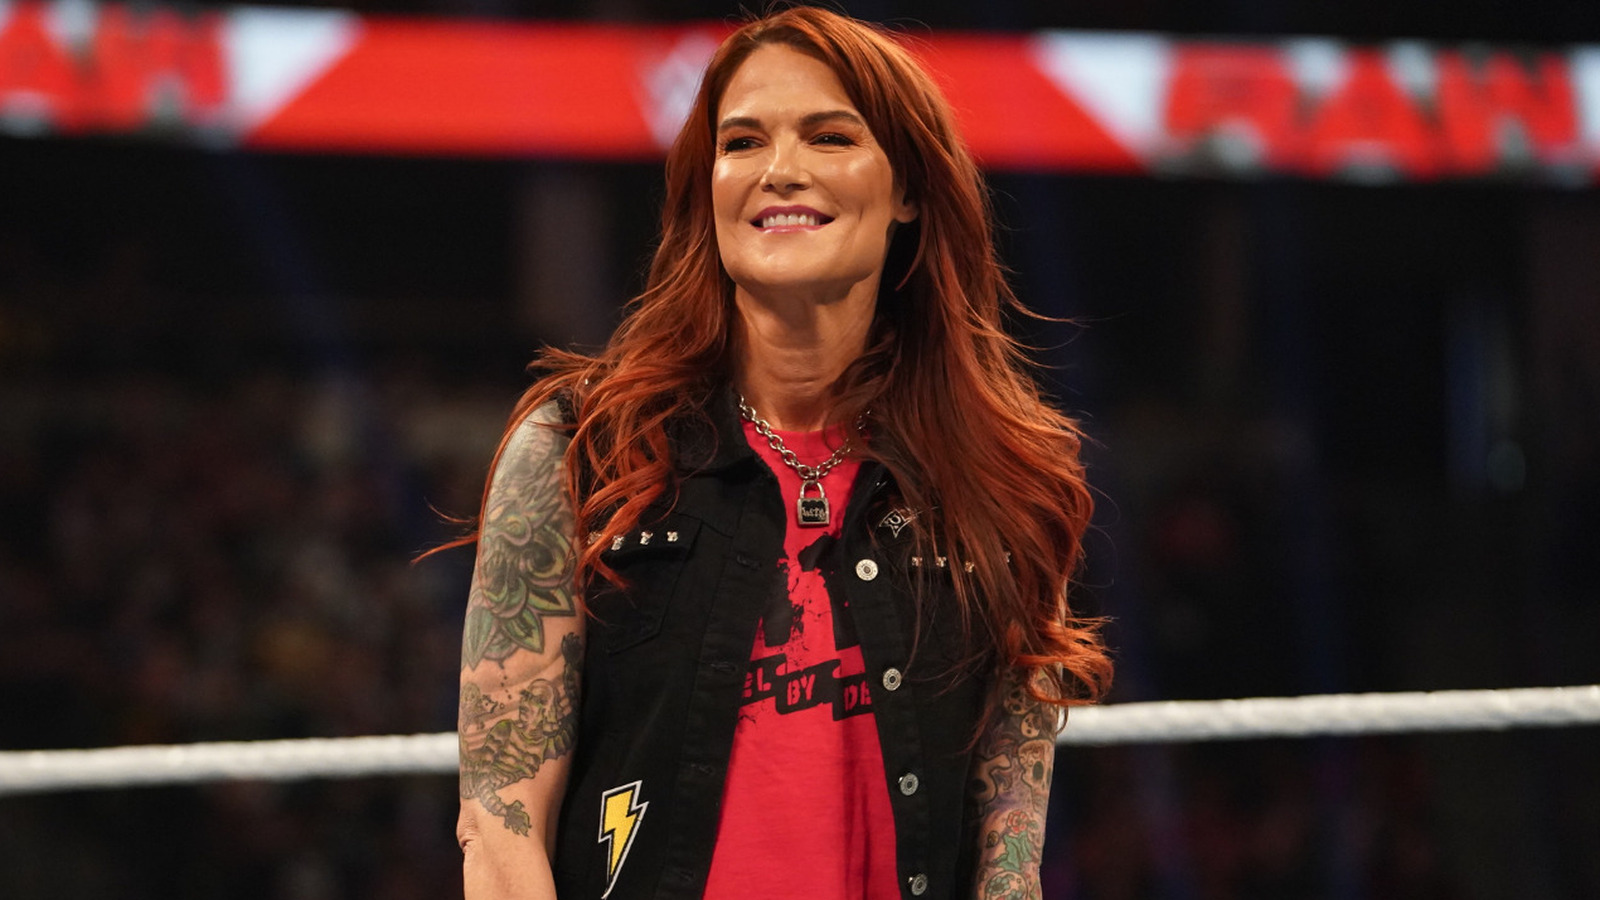 Bruce Prichard Discusses Seeing WWE Hall Of Famer Lita On The Indie Circuit